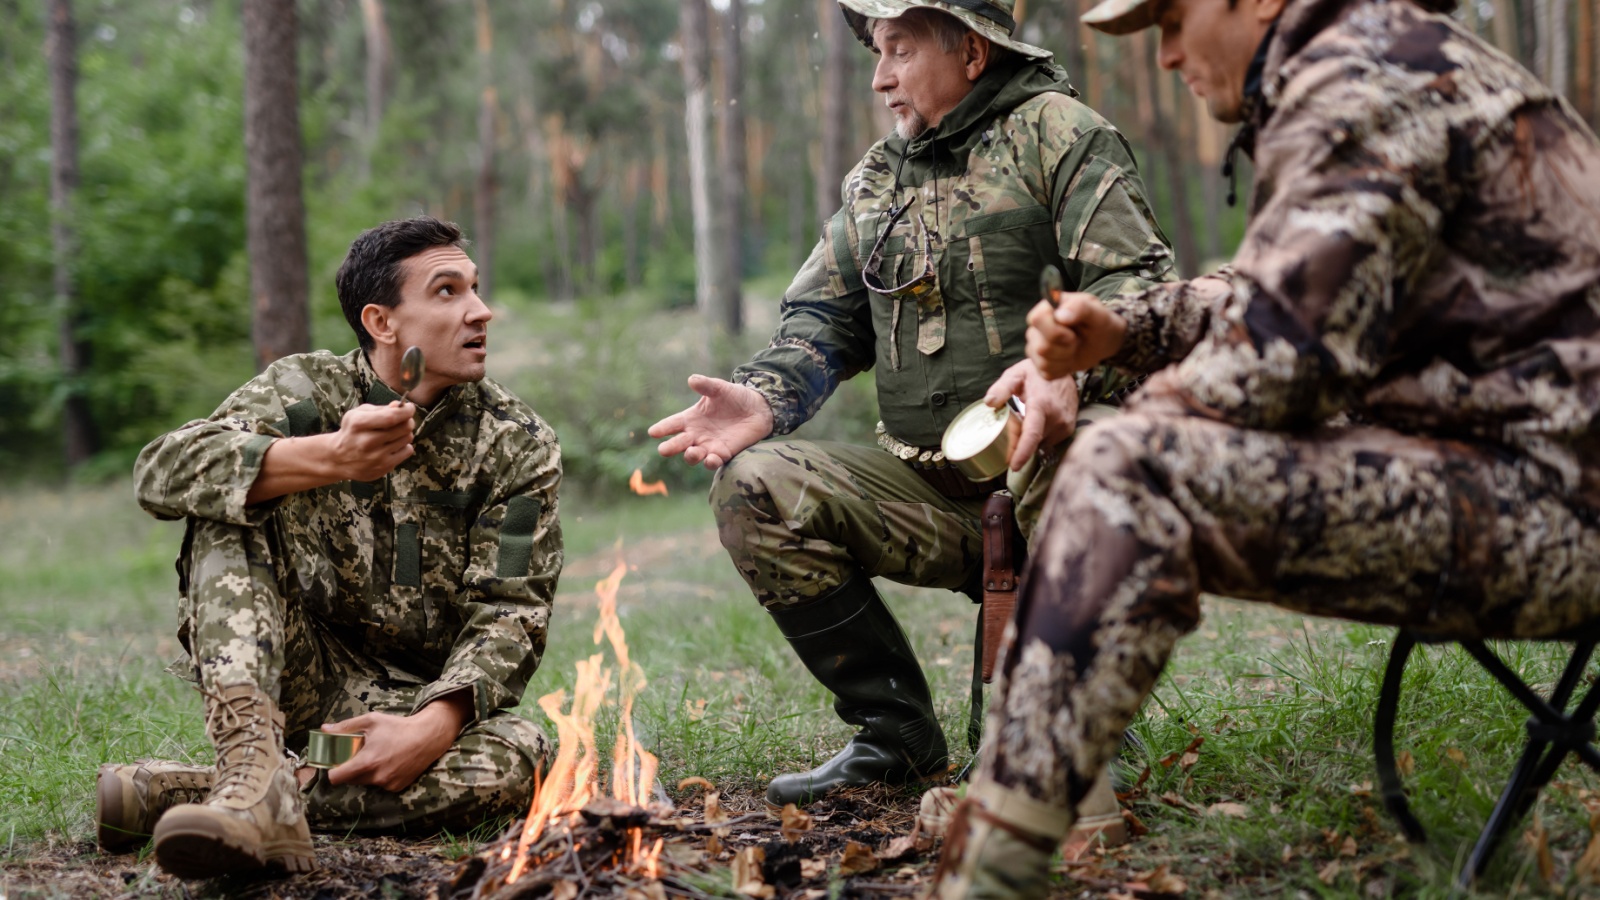 Hunters sit on a halt and discuss something behind a fire. Hunters are sitting near a campfire in camouflage uniforms.